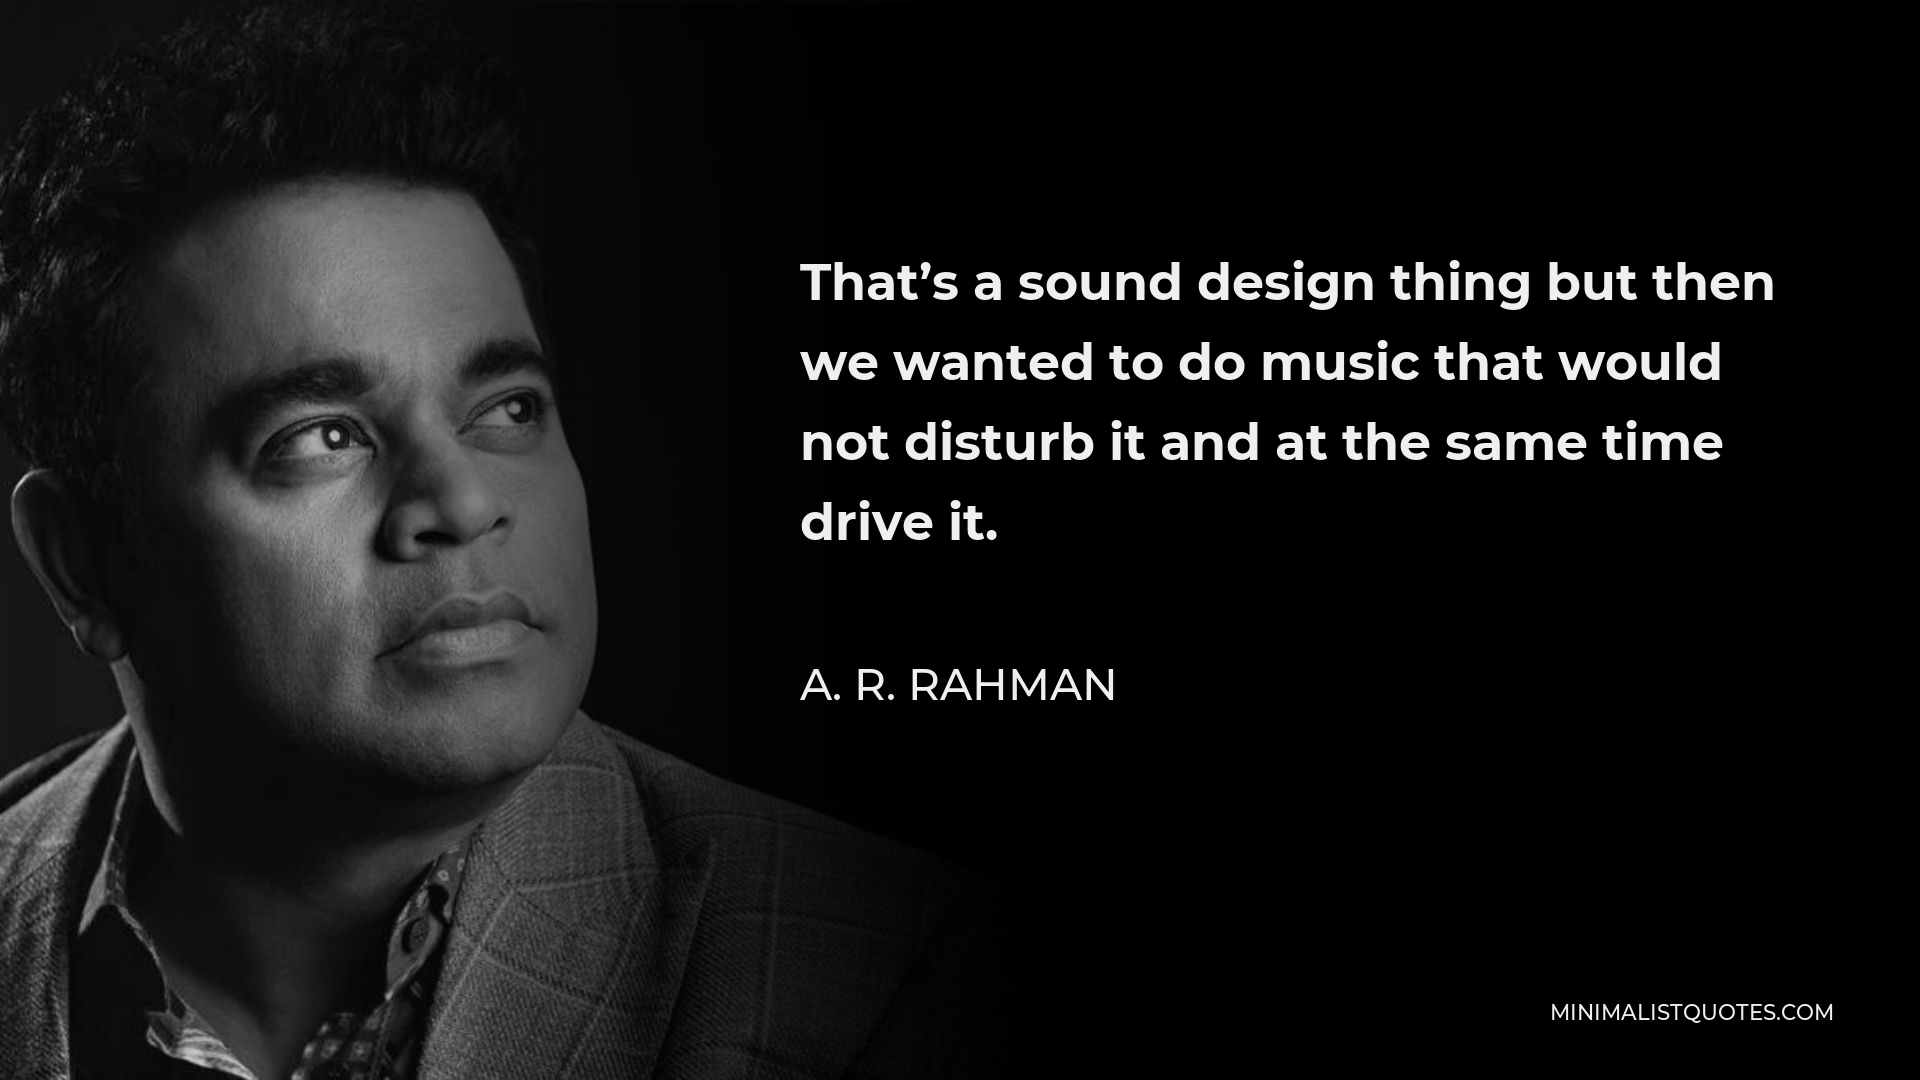 A. R. Rahman Quote - That’s a sound design thing but then we wanted to do music that would not disturb it and at the same time drive it.